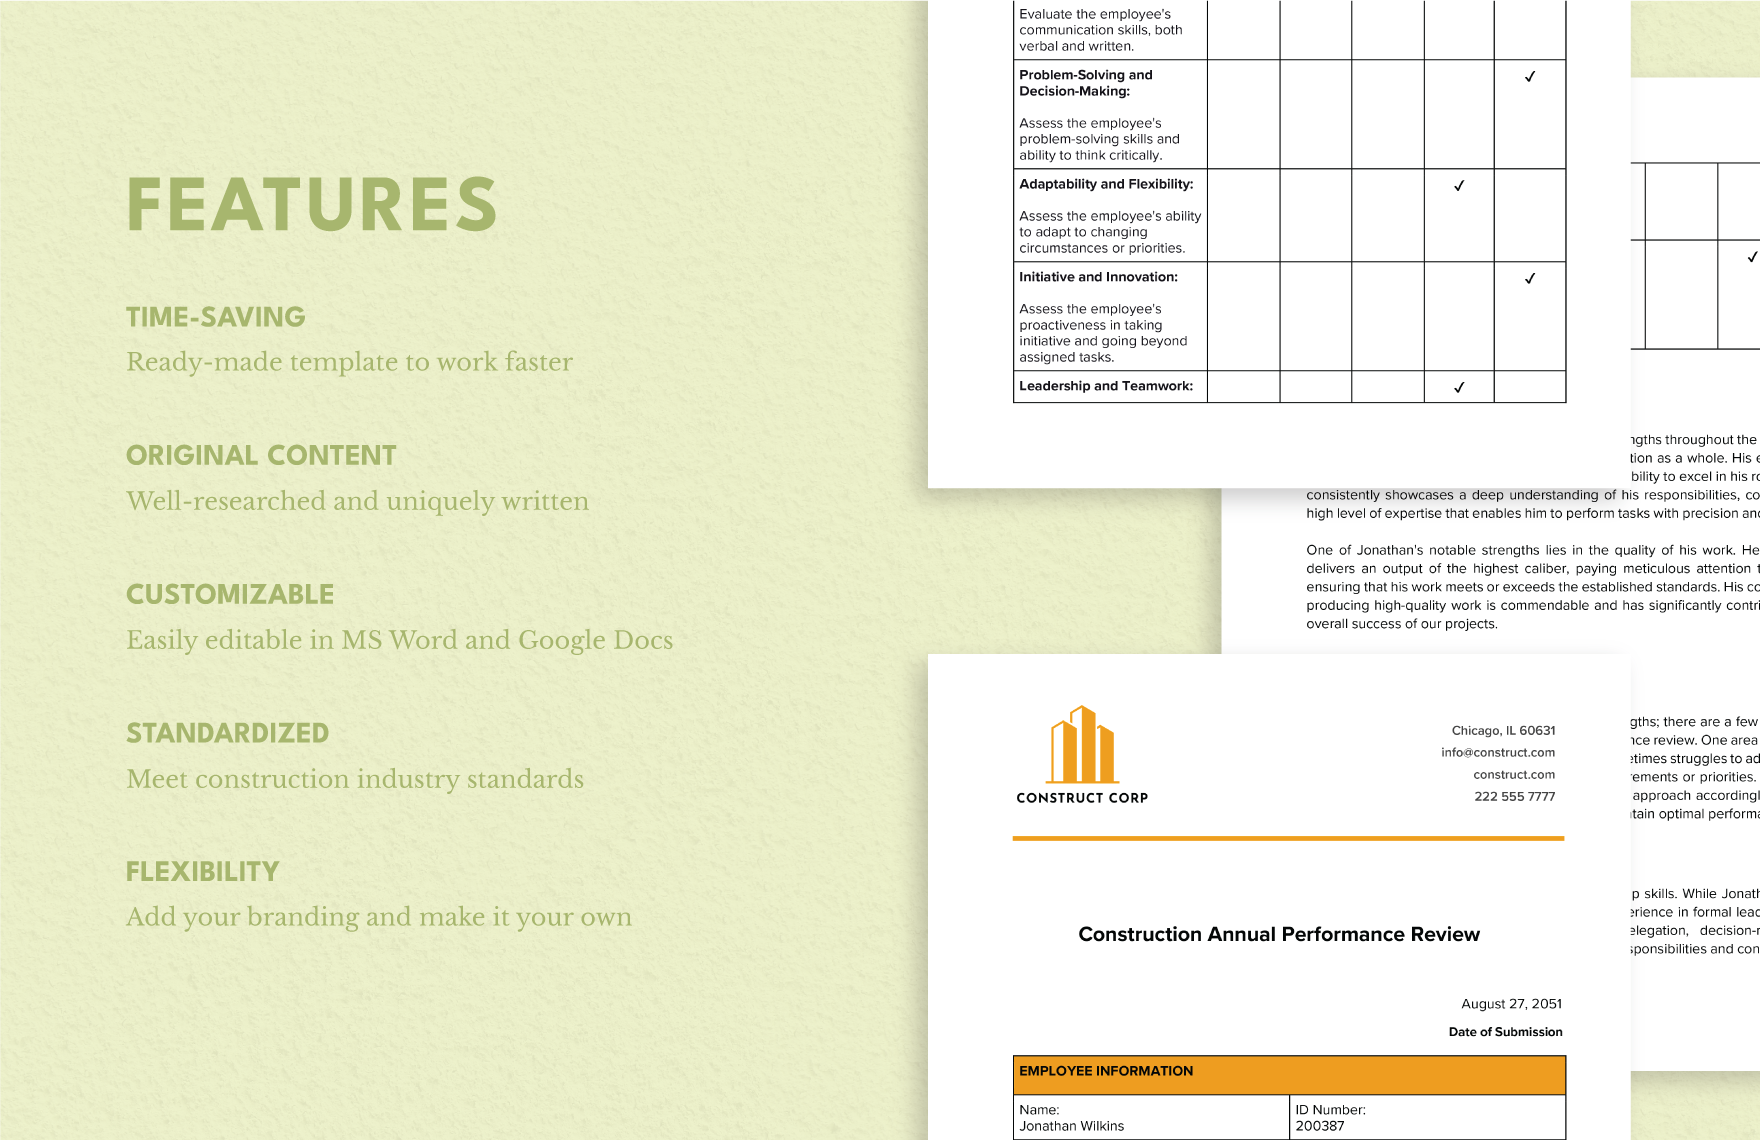 Construction Annual Performance Review Template